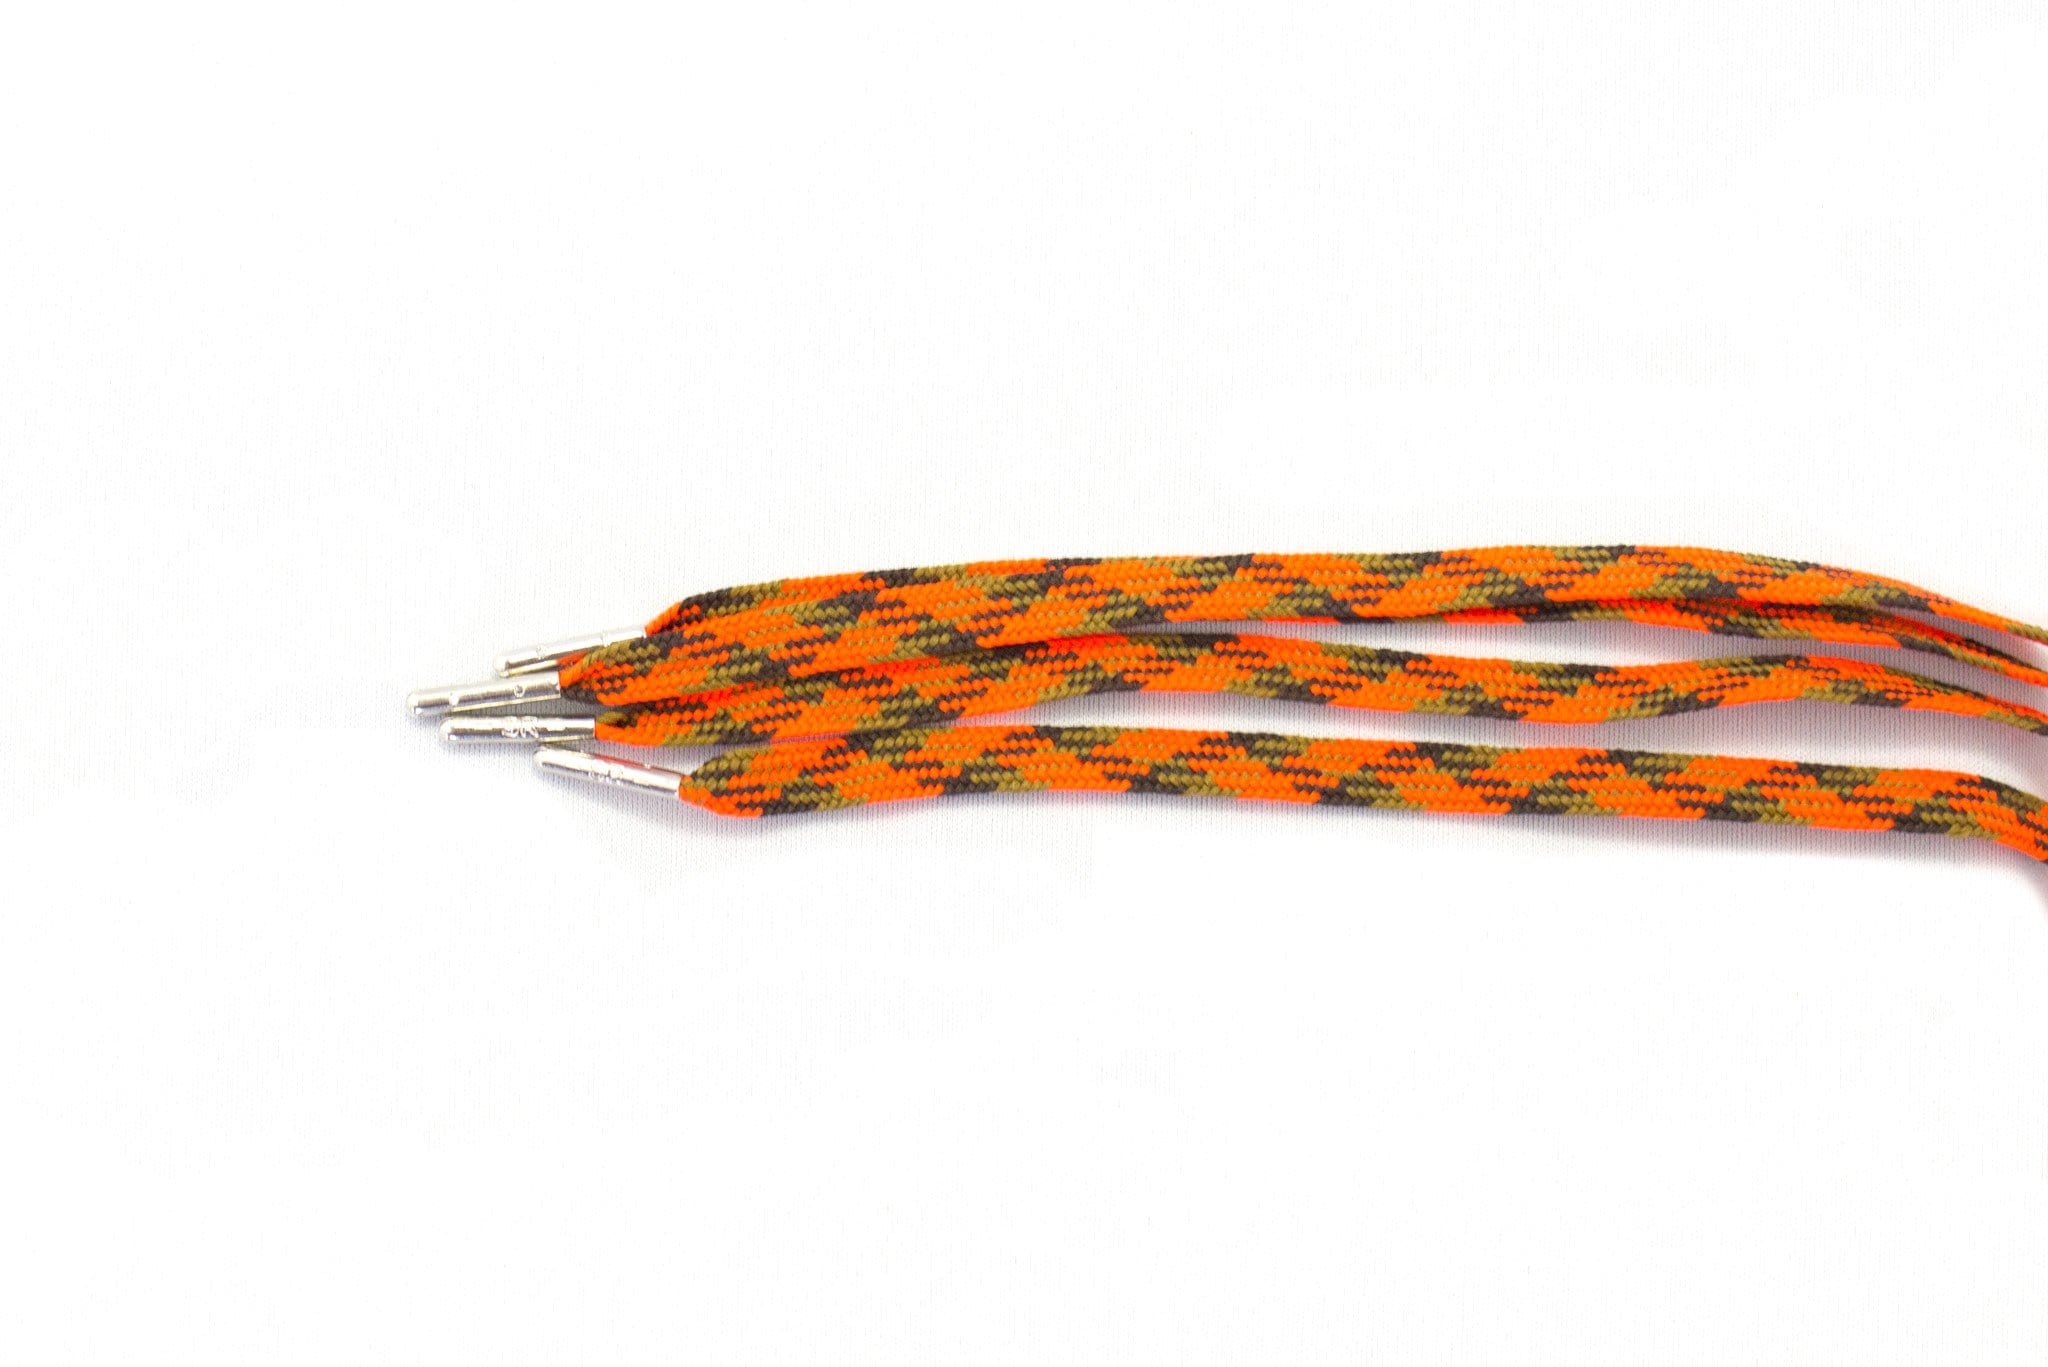 Camo brown laces for sneakers (Length: 45"/114cm) - Stolen Riches